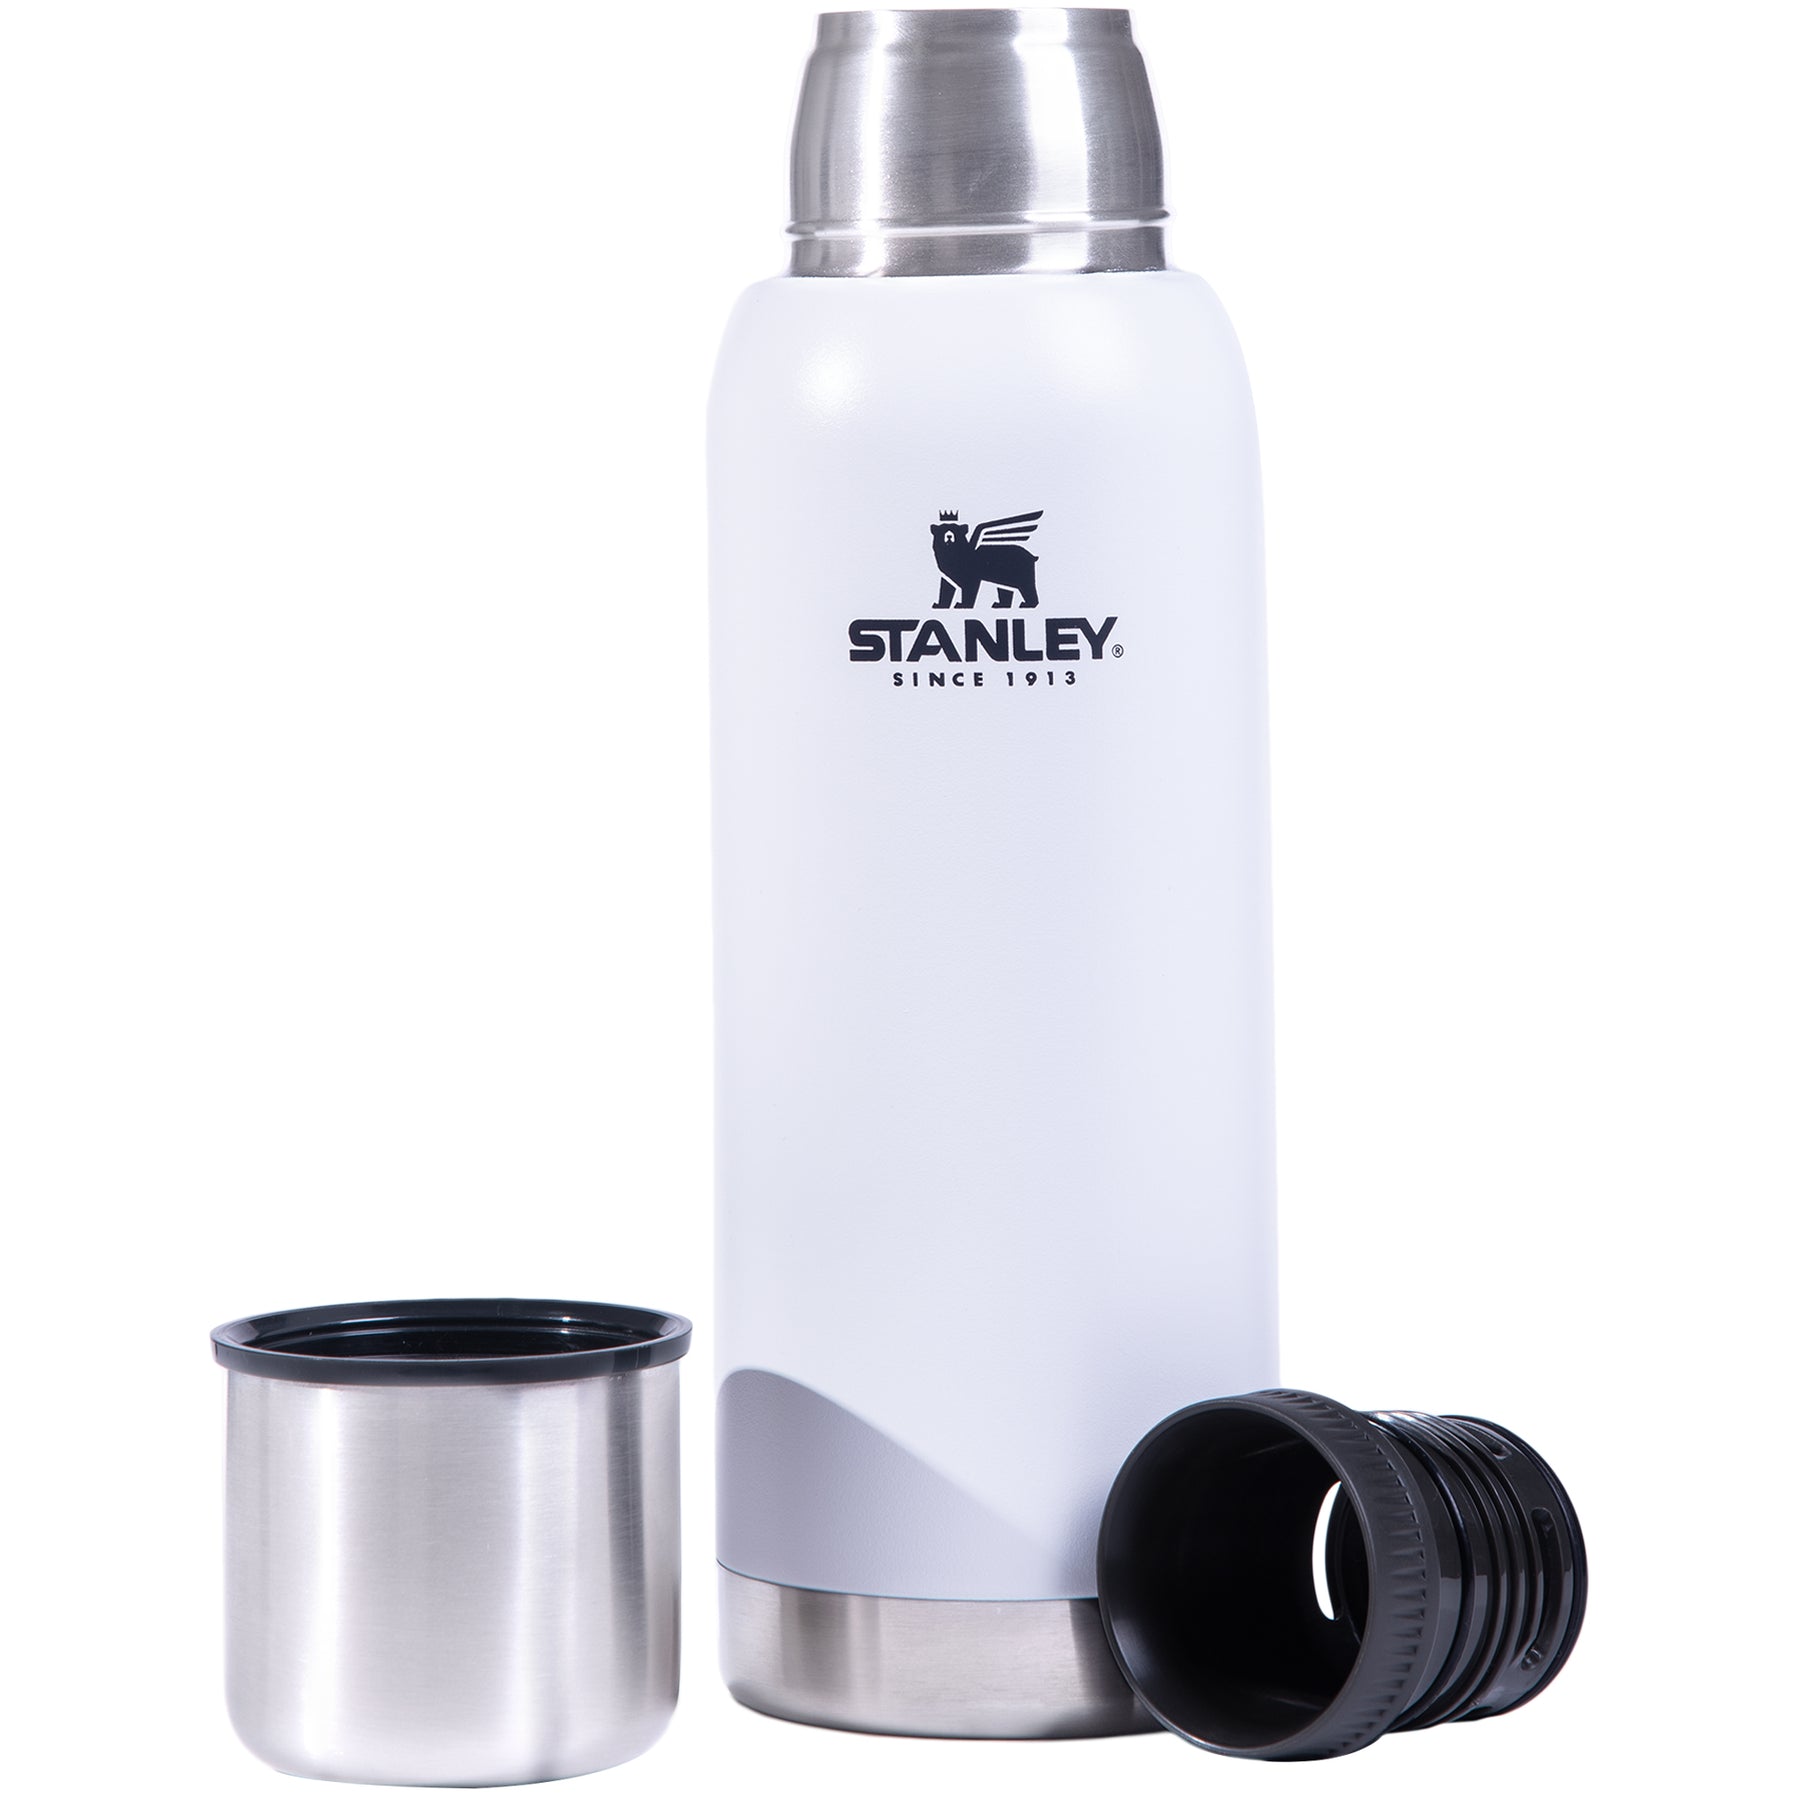 TERMO MATE SYSTEM STANLEY CLASSIC 1.2 LTS – Stanley1913Store